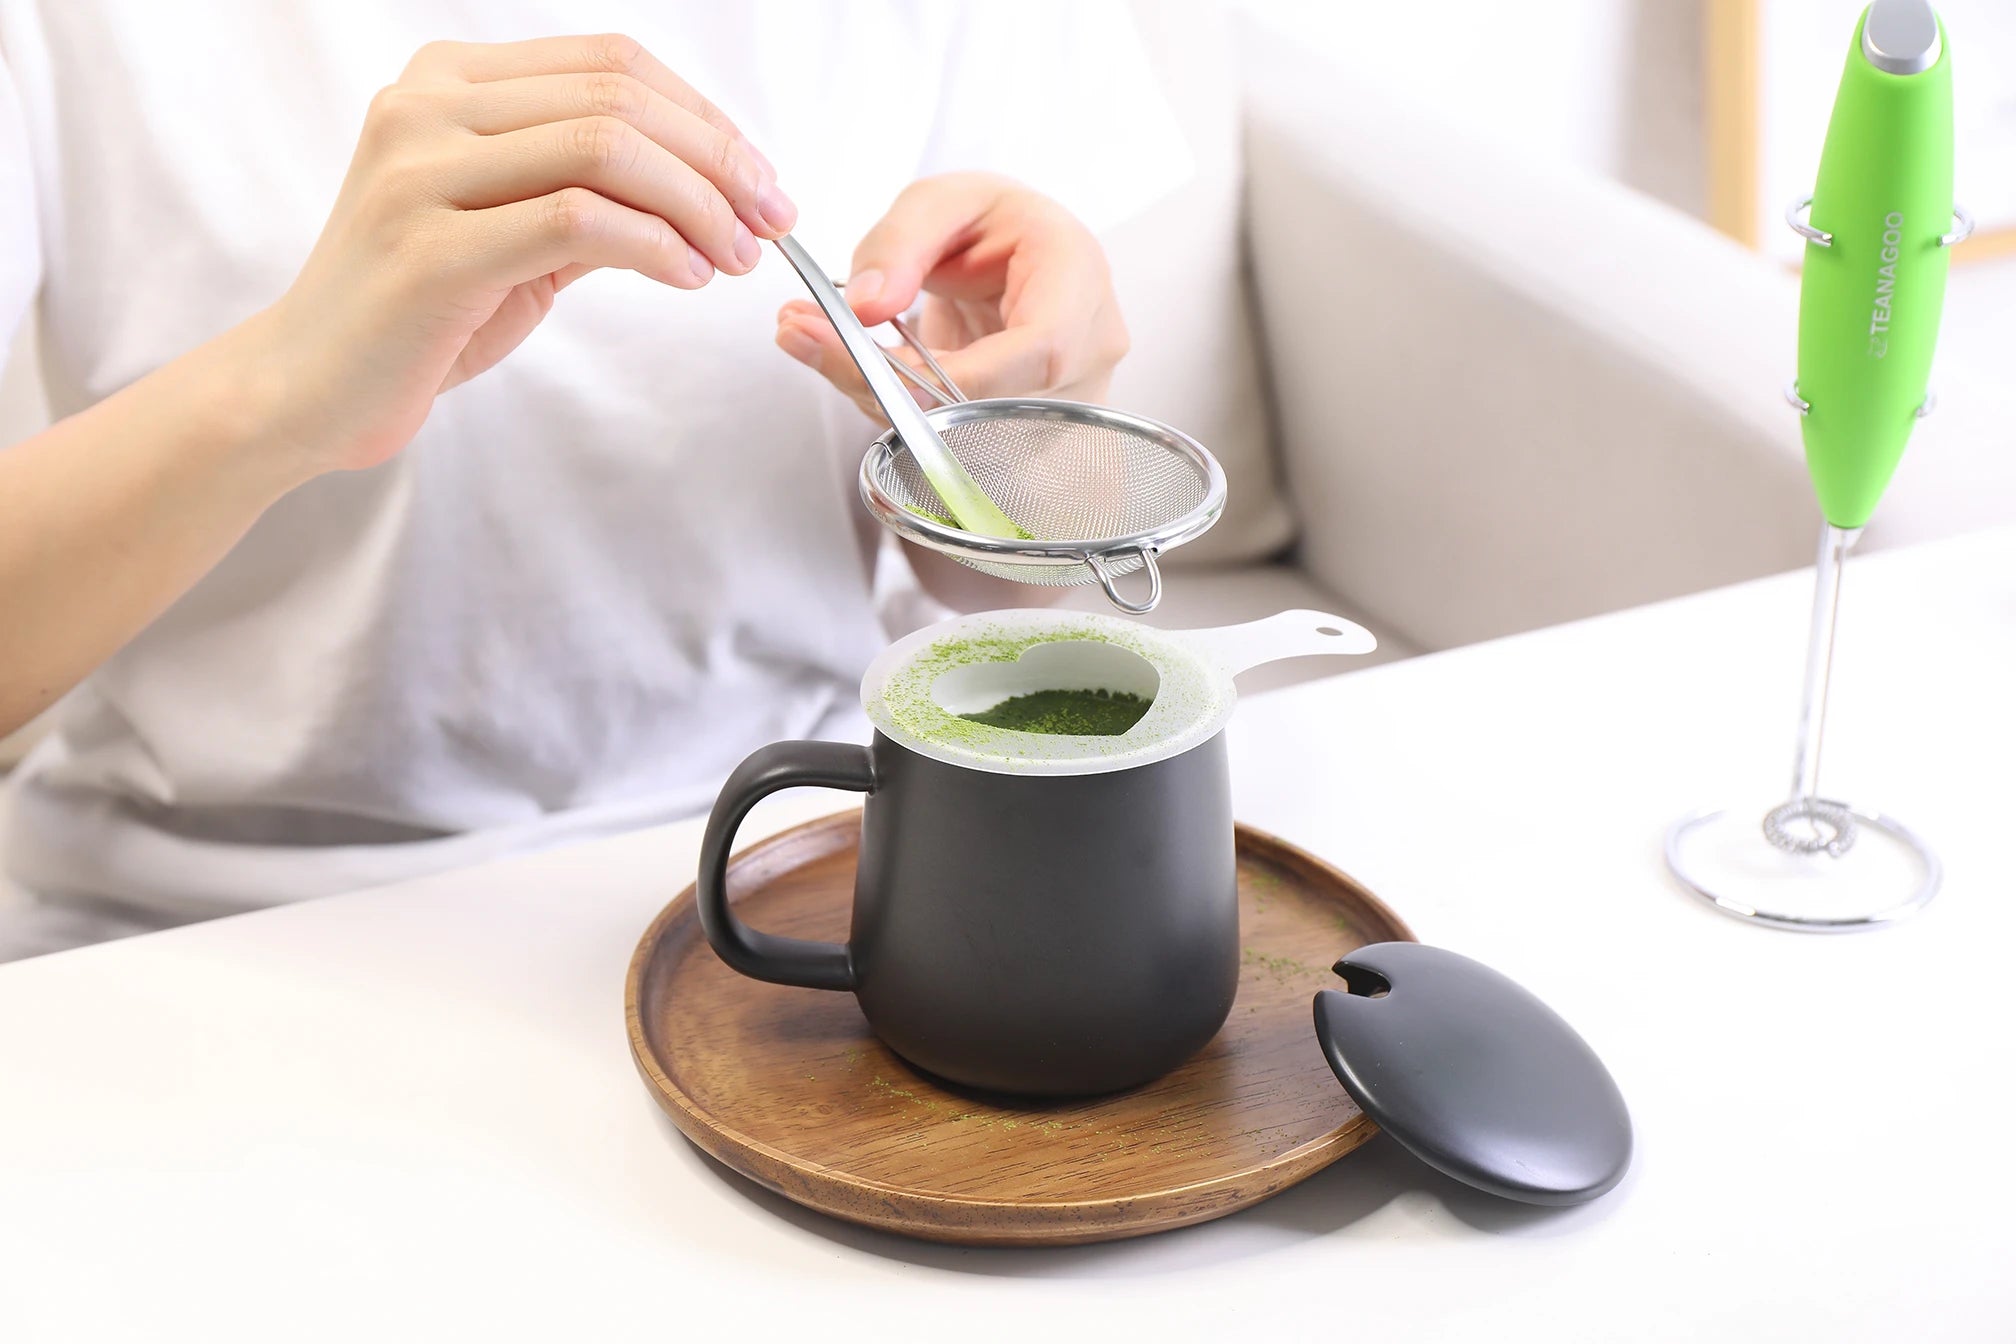 https://cdn.shopify.com/s/files/1/0330/5917/6493/files/Matcha_Electric_Whisk_and_Stand_Stainless_Steel_Scoop_and_Sifter2.webp?v=1657848490